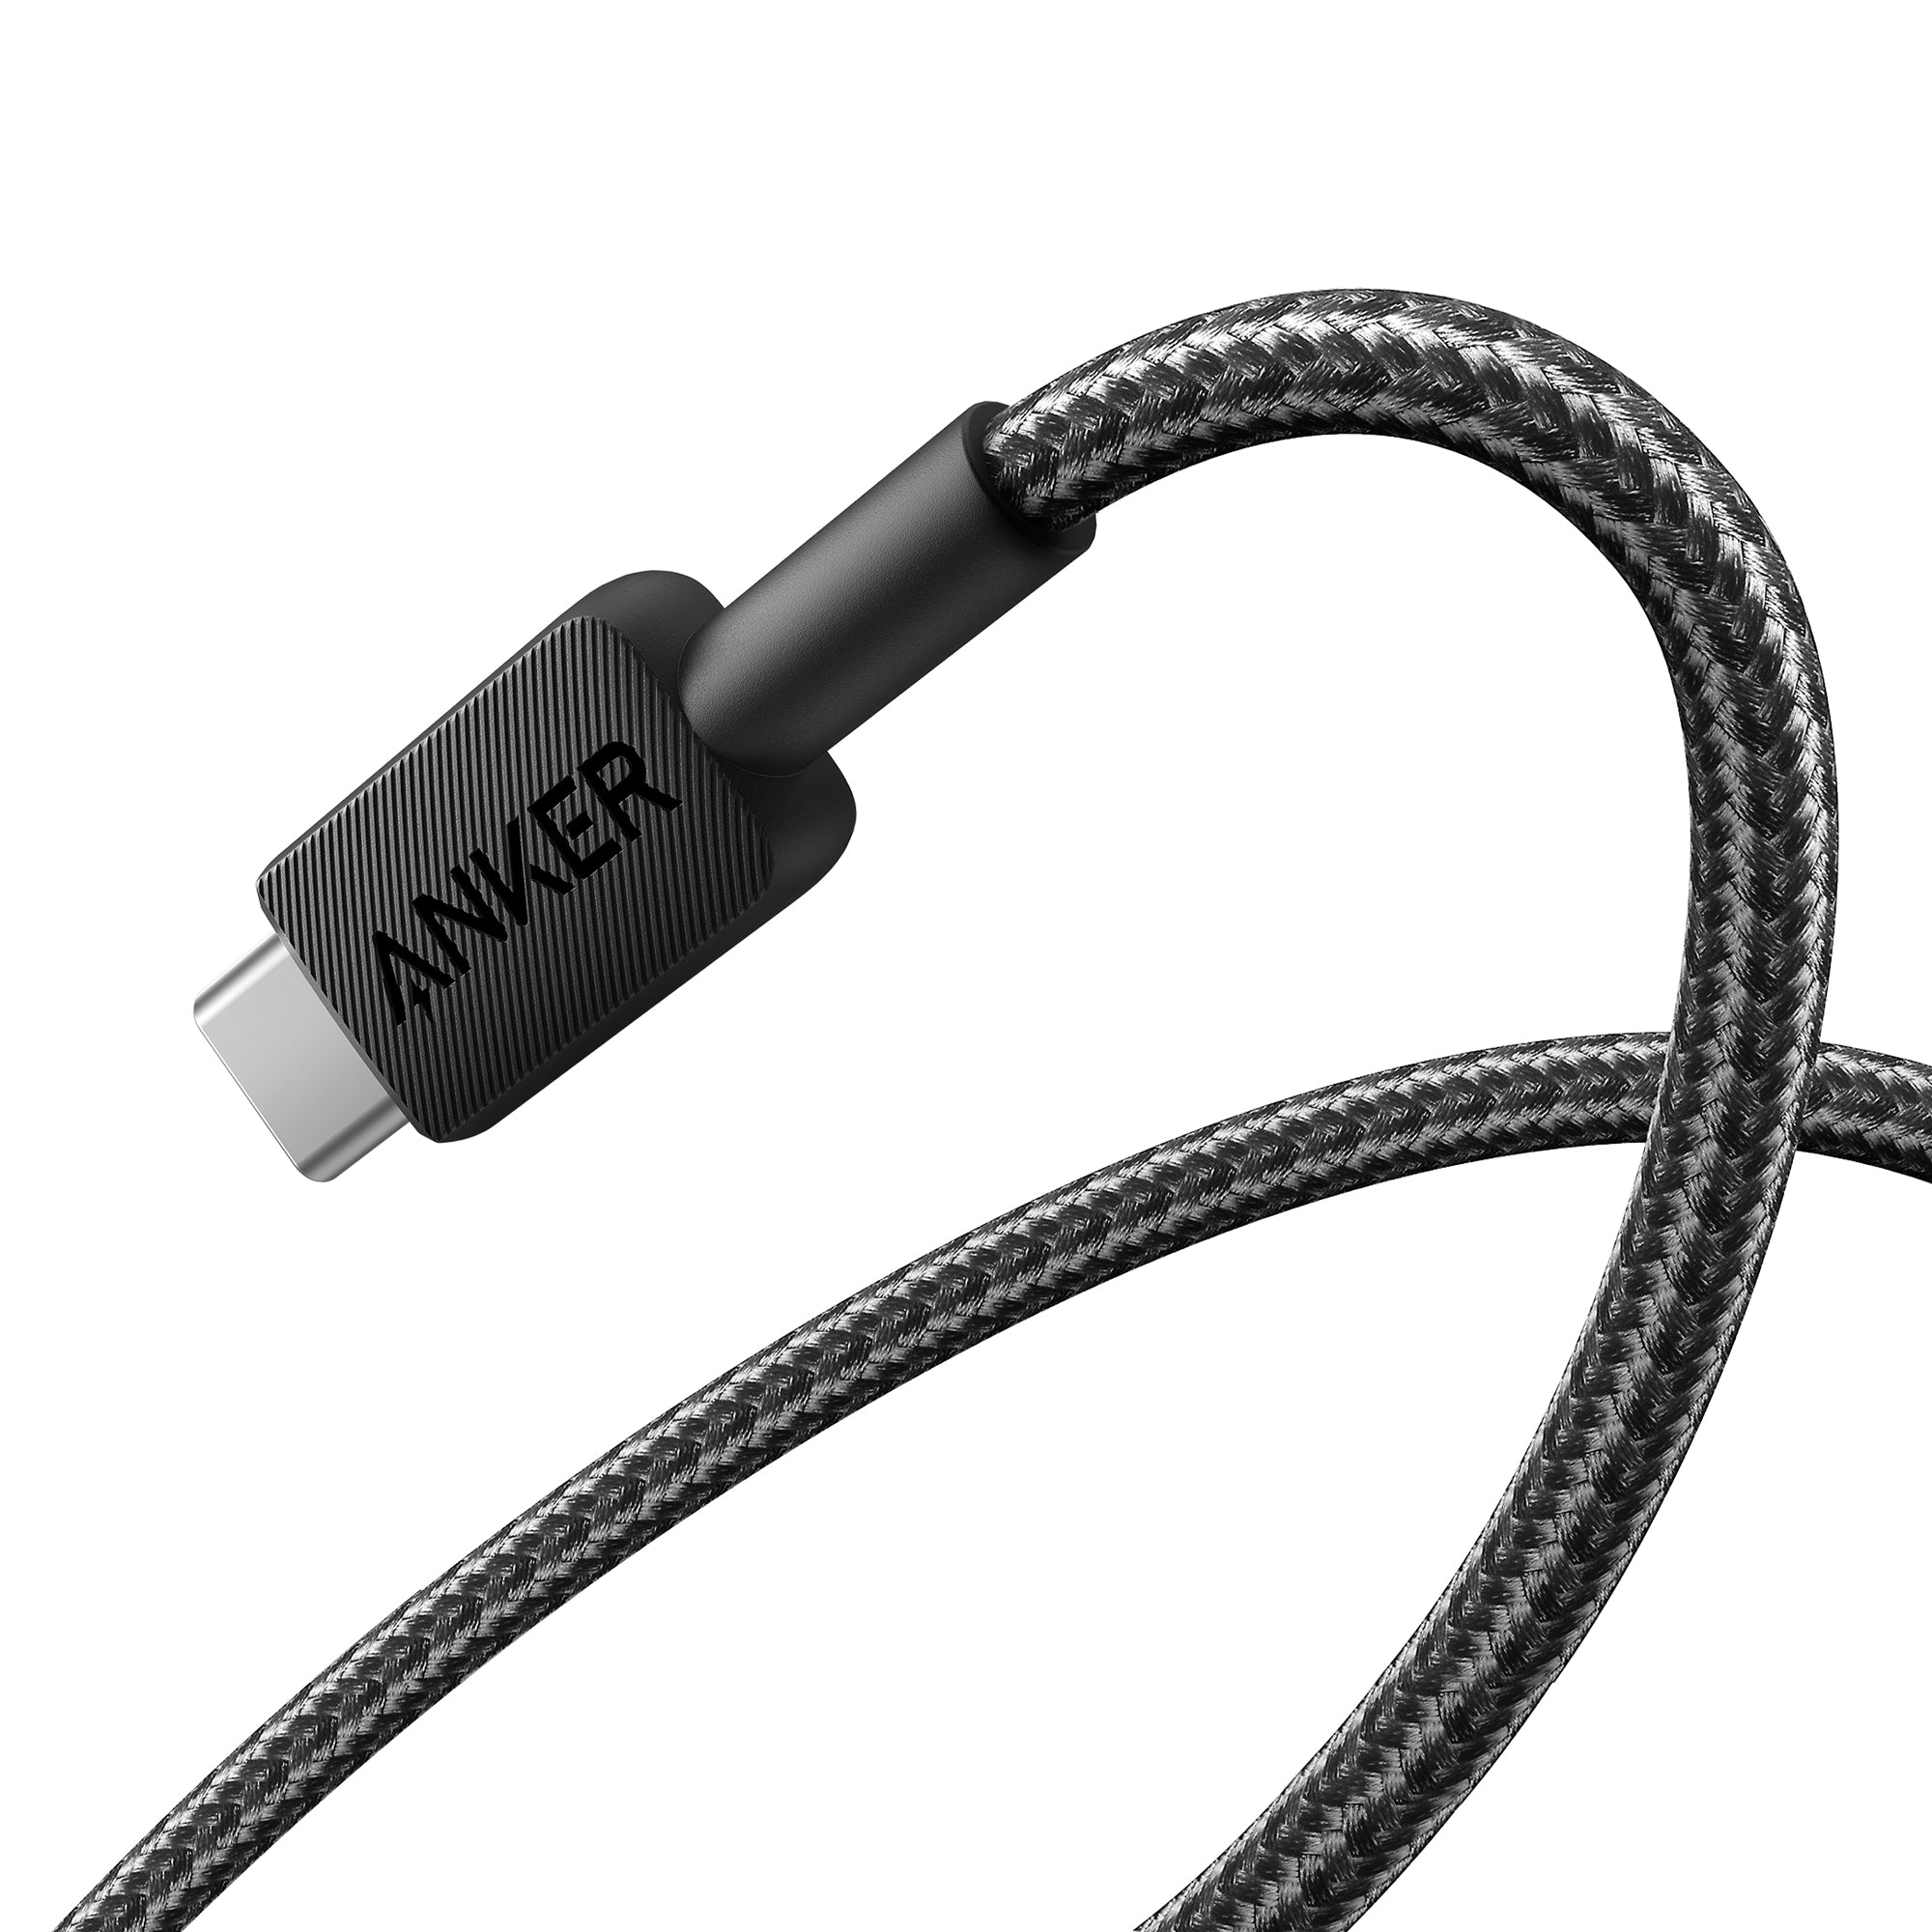 Anker 322 USB-A to USB-C Braided Cable Braided 1.8 Meter A81H6H11 in black color